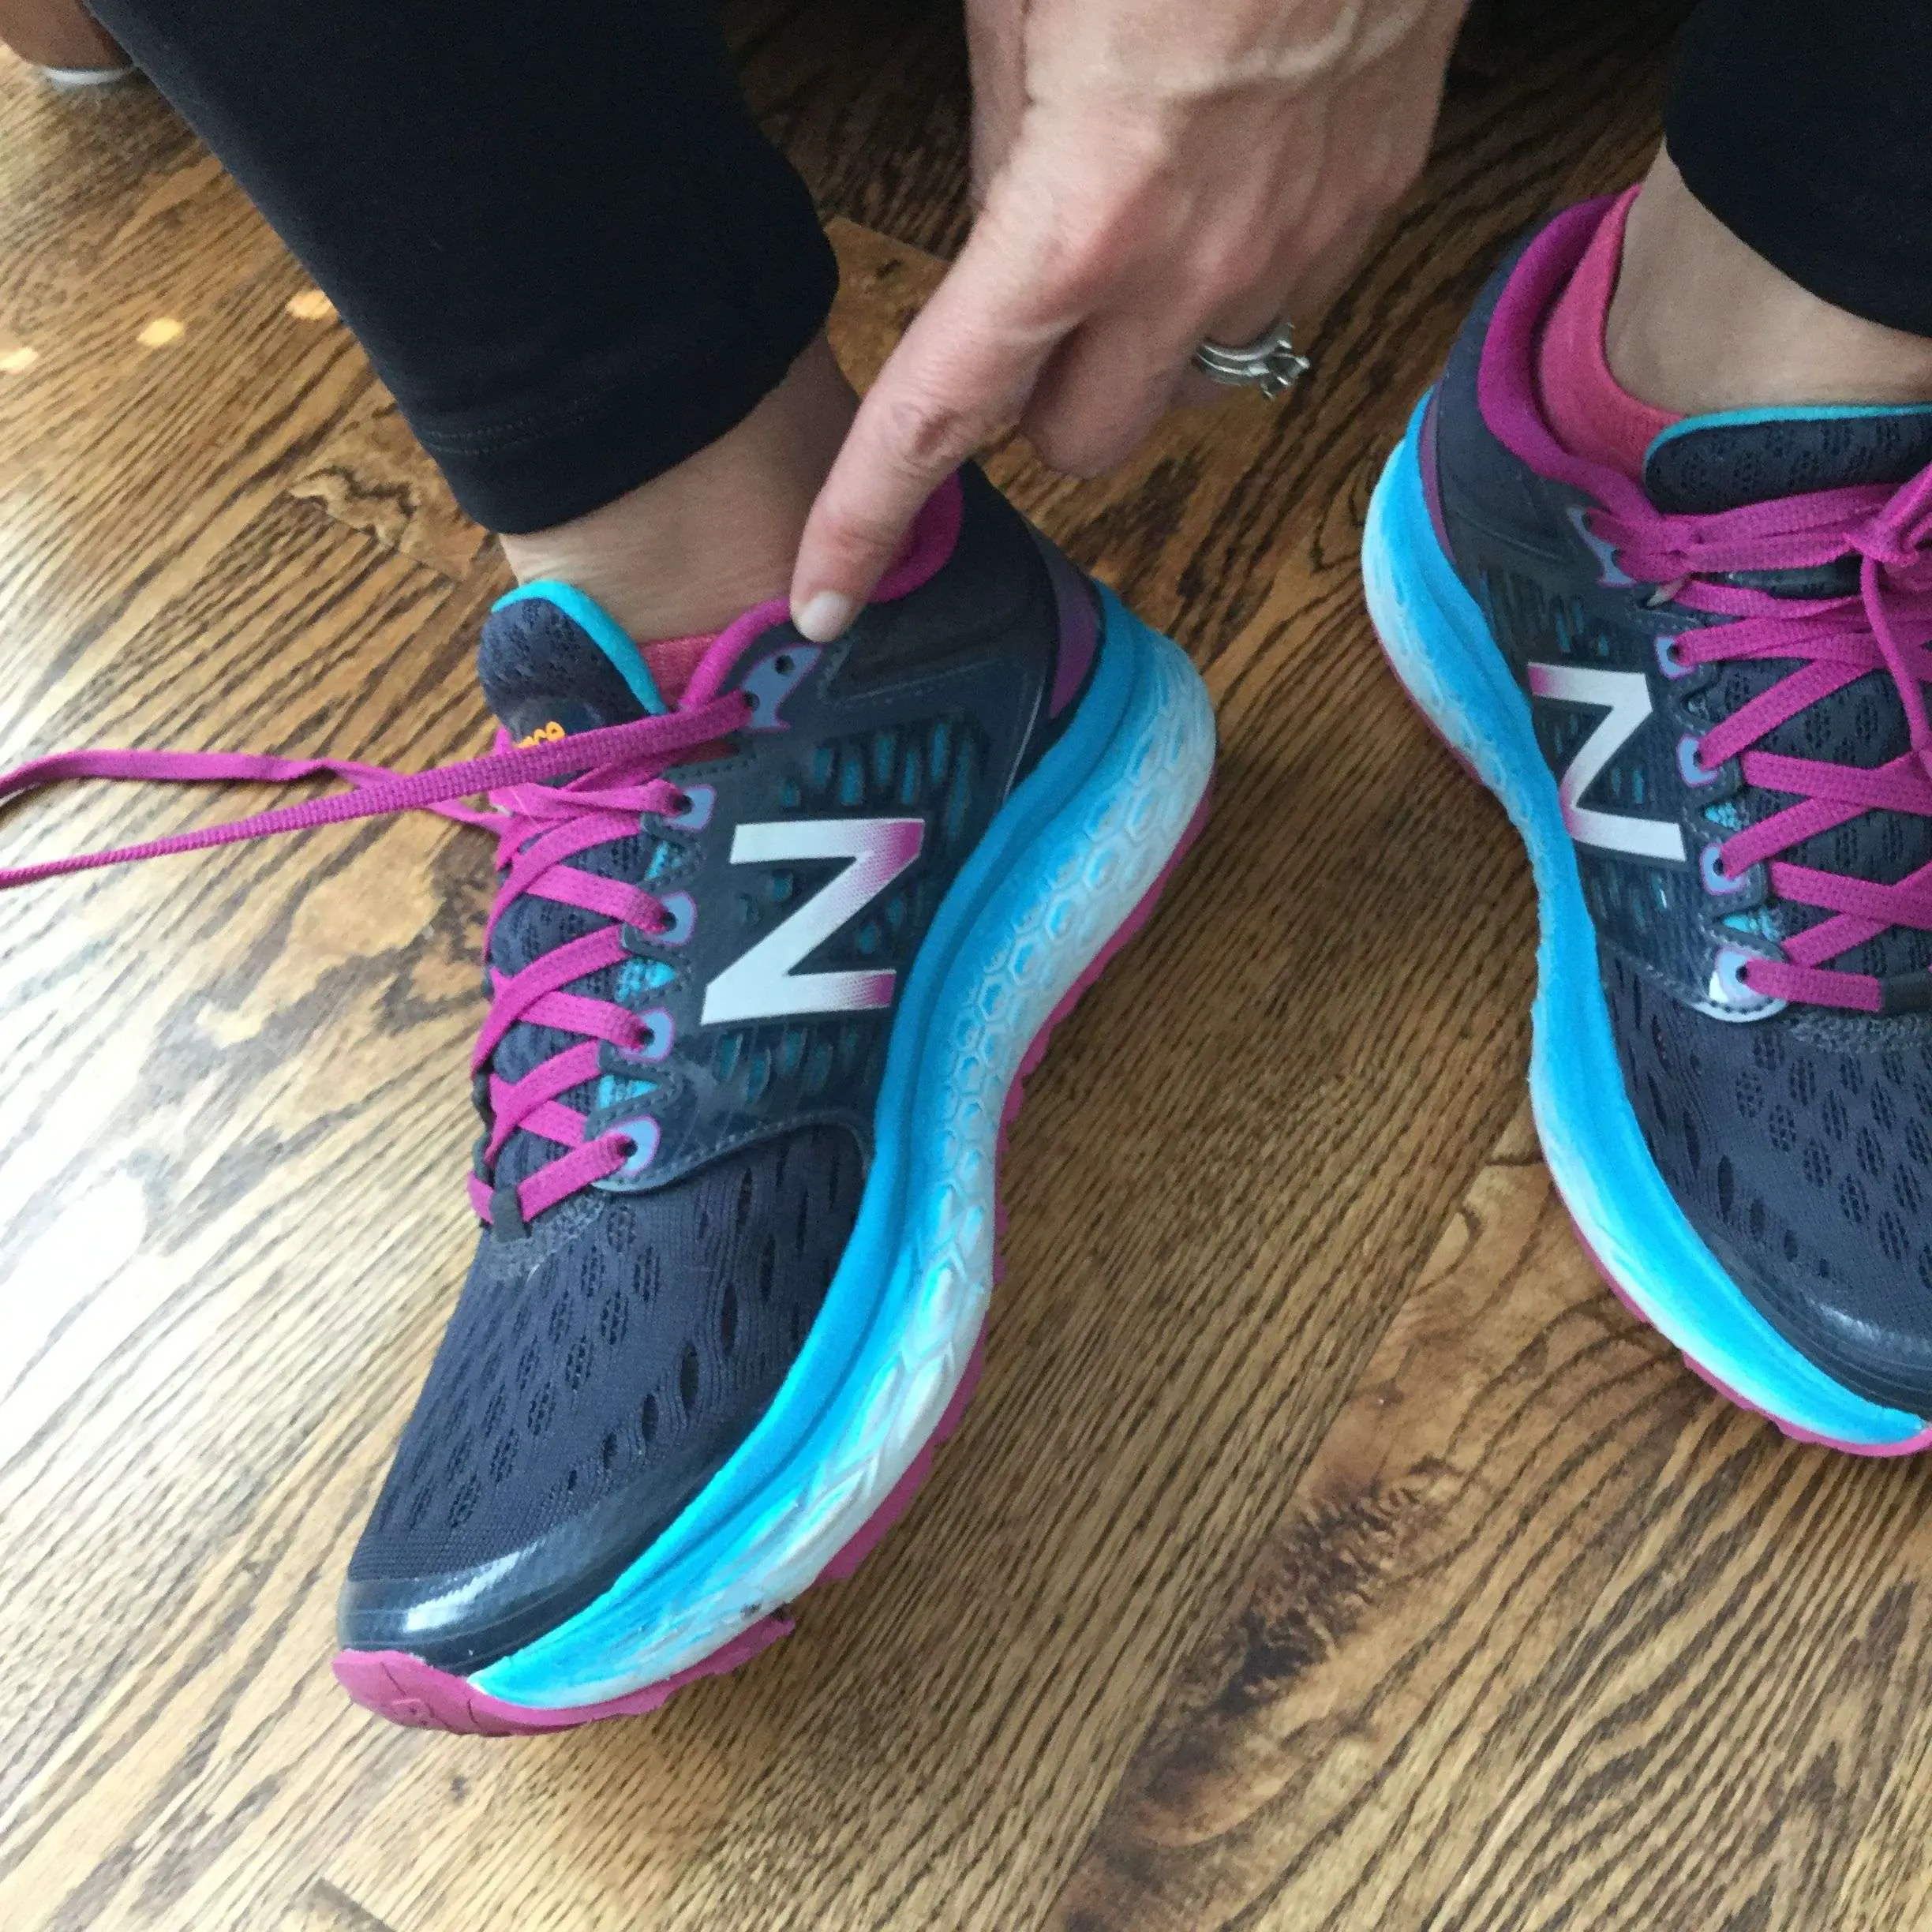 How to Tie Your Running Shoes for Ankle Support and ...